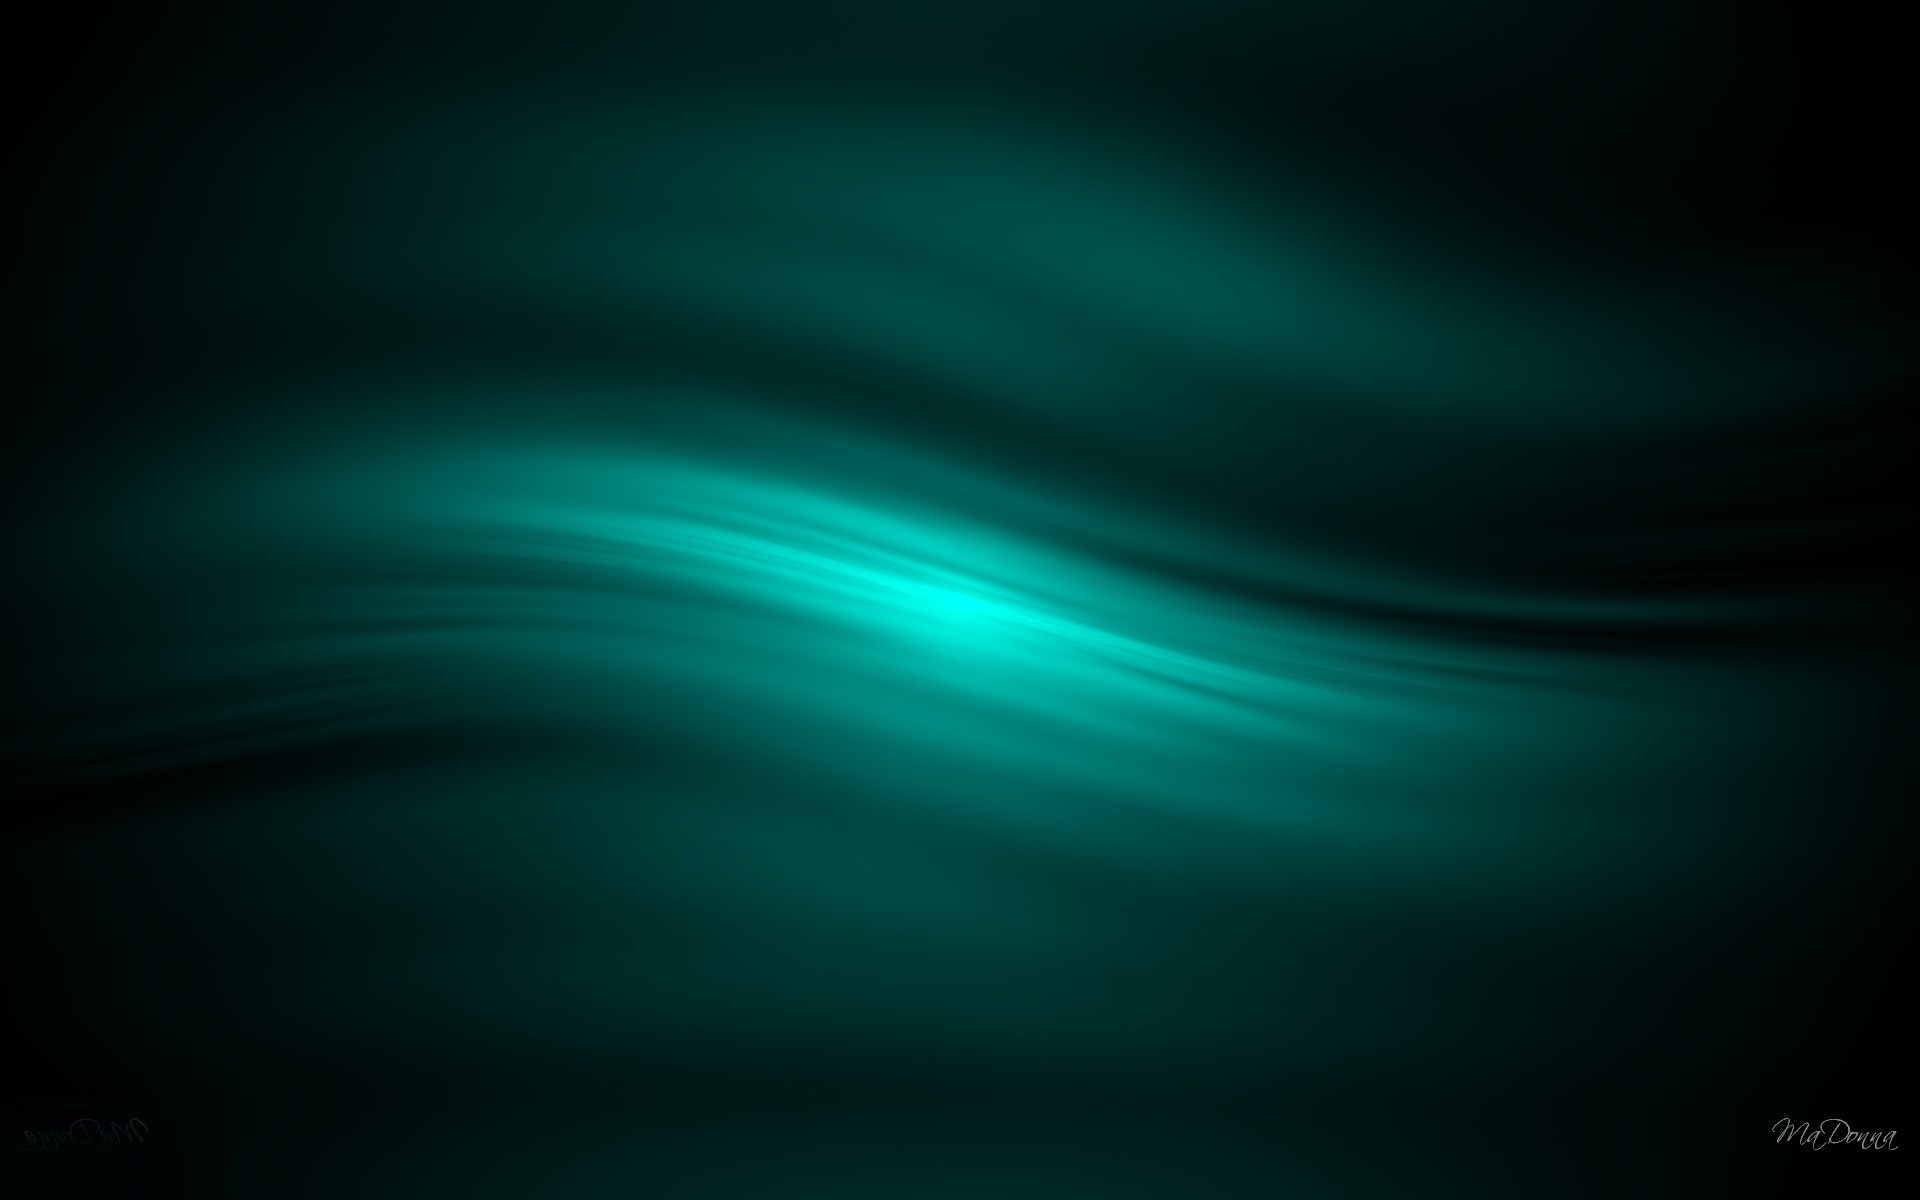 Cyan Backgrounds Free Download